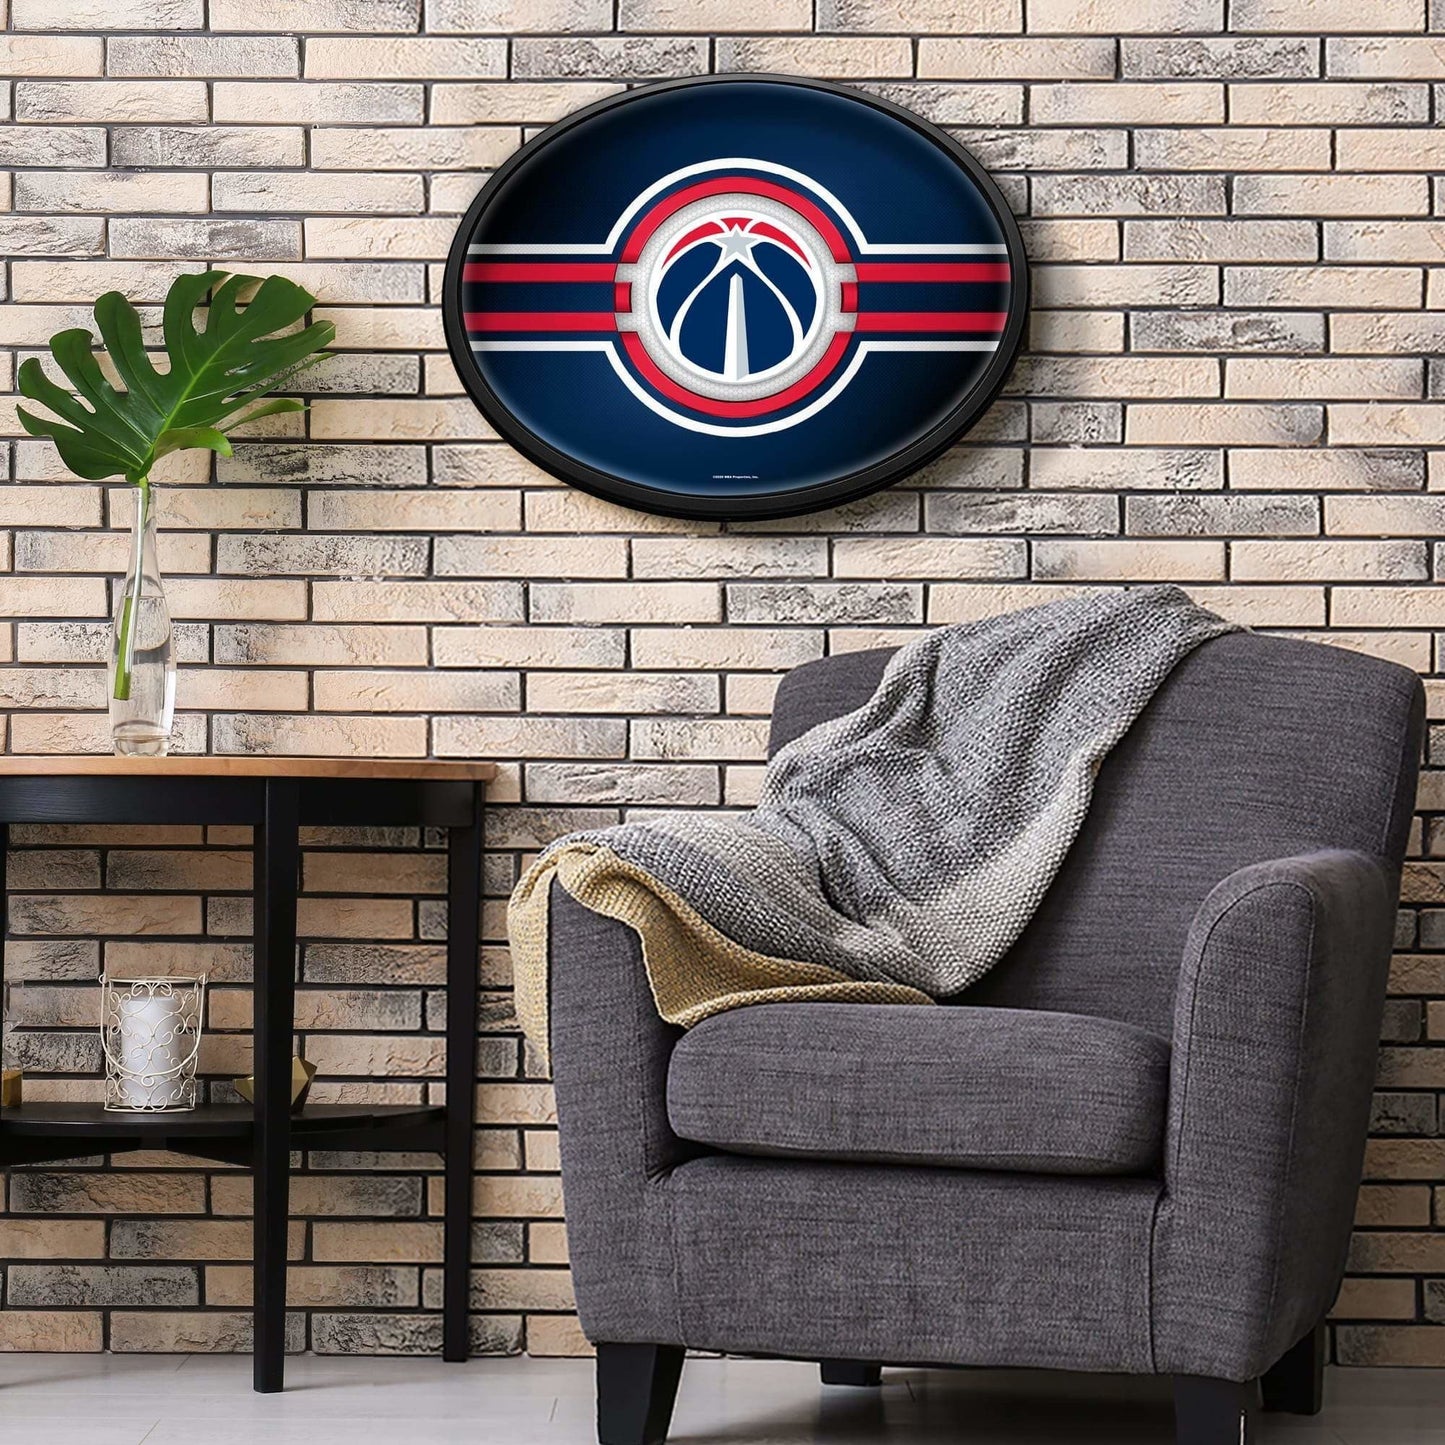 Washington Wizards: Oval Slimline Lighted Wall Sign - The Fan-Brand